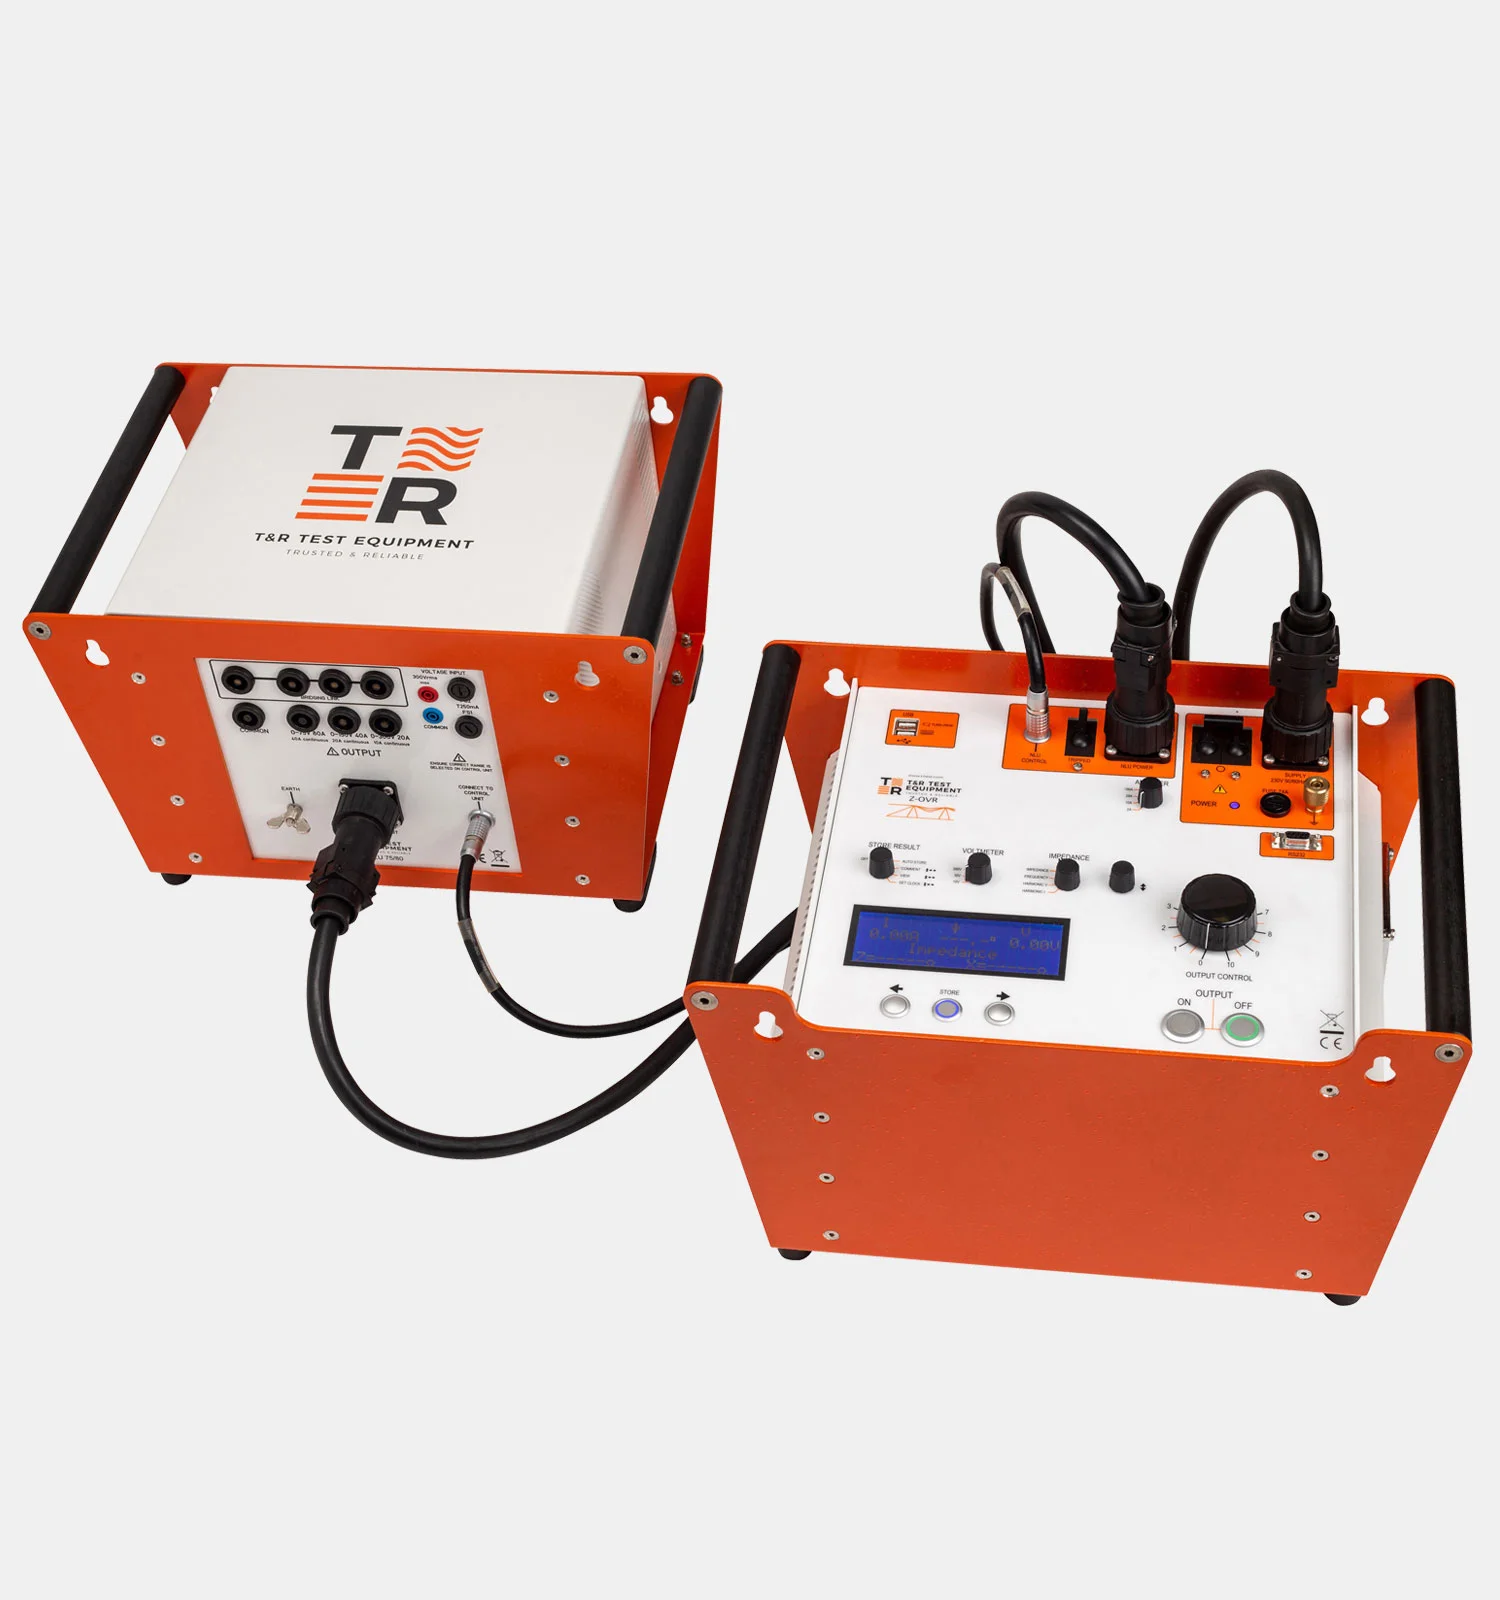 Suppliers of Z-OVR Cable Impedance Test System UK